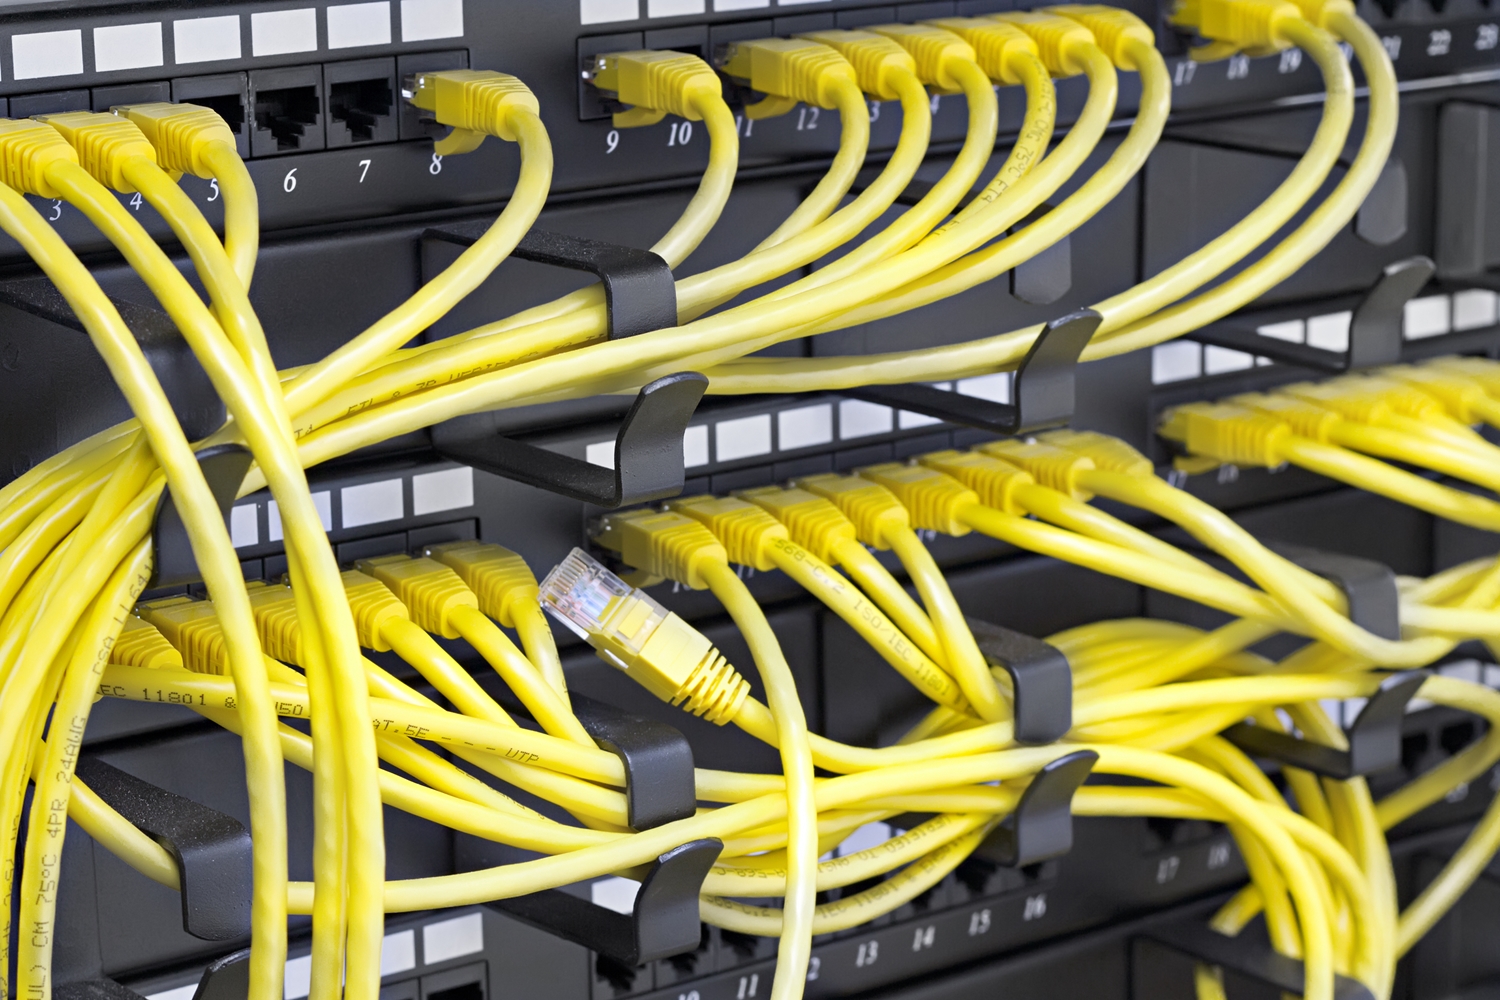 organized data rack cabling with yellow cables